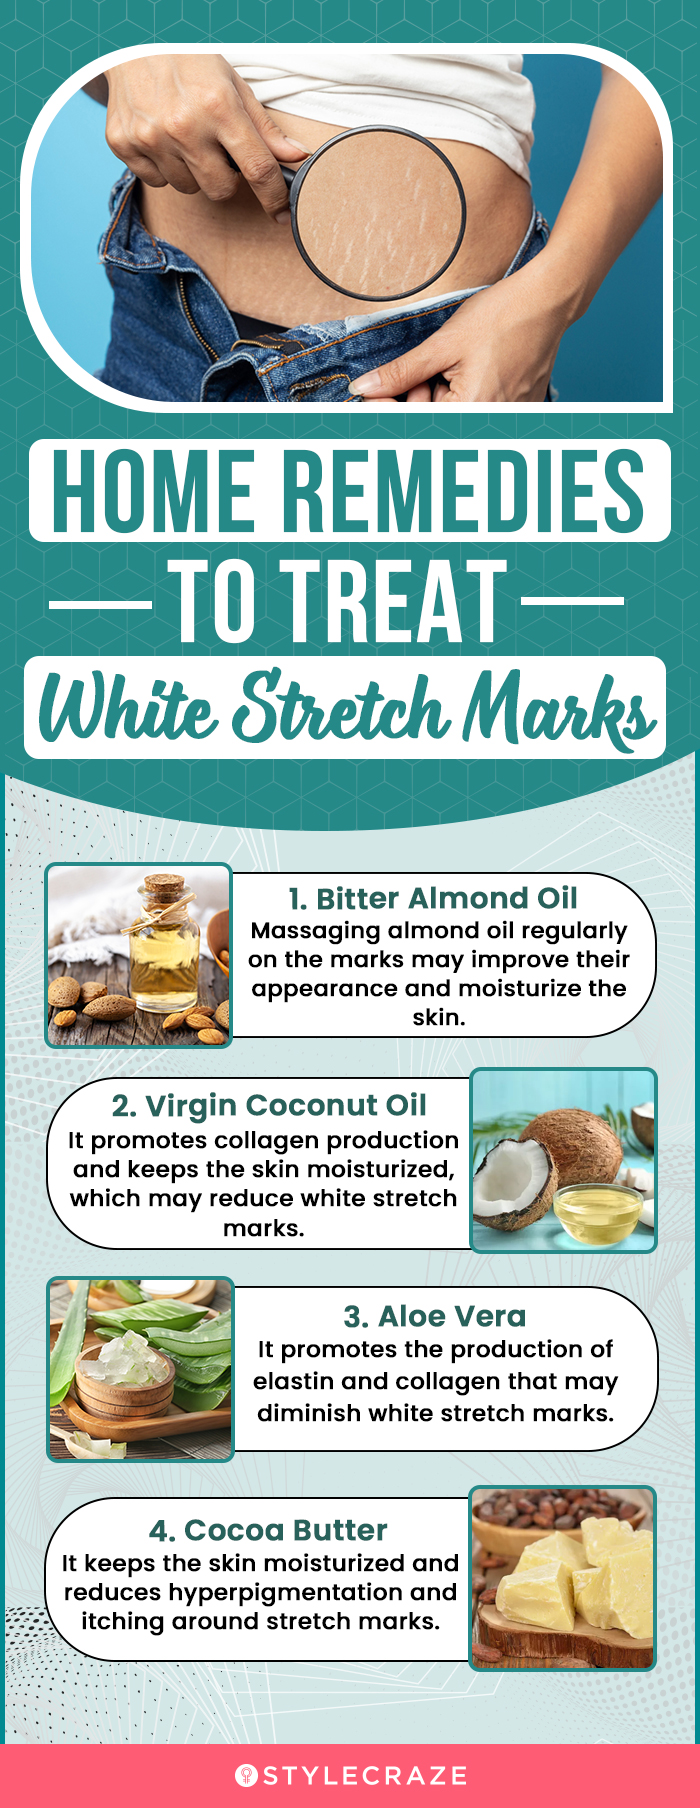 home remedies to treat white stretch marks [infographic]